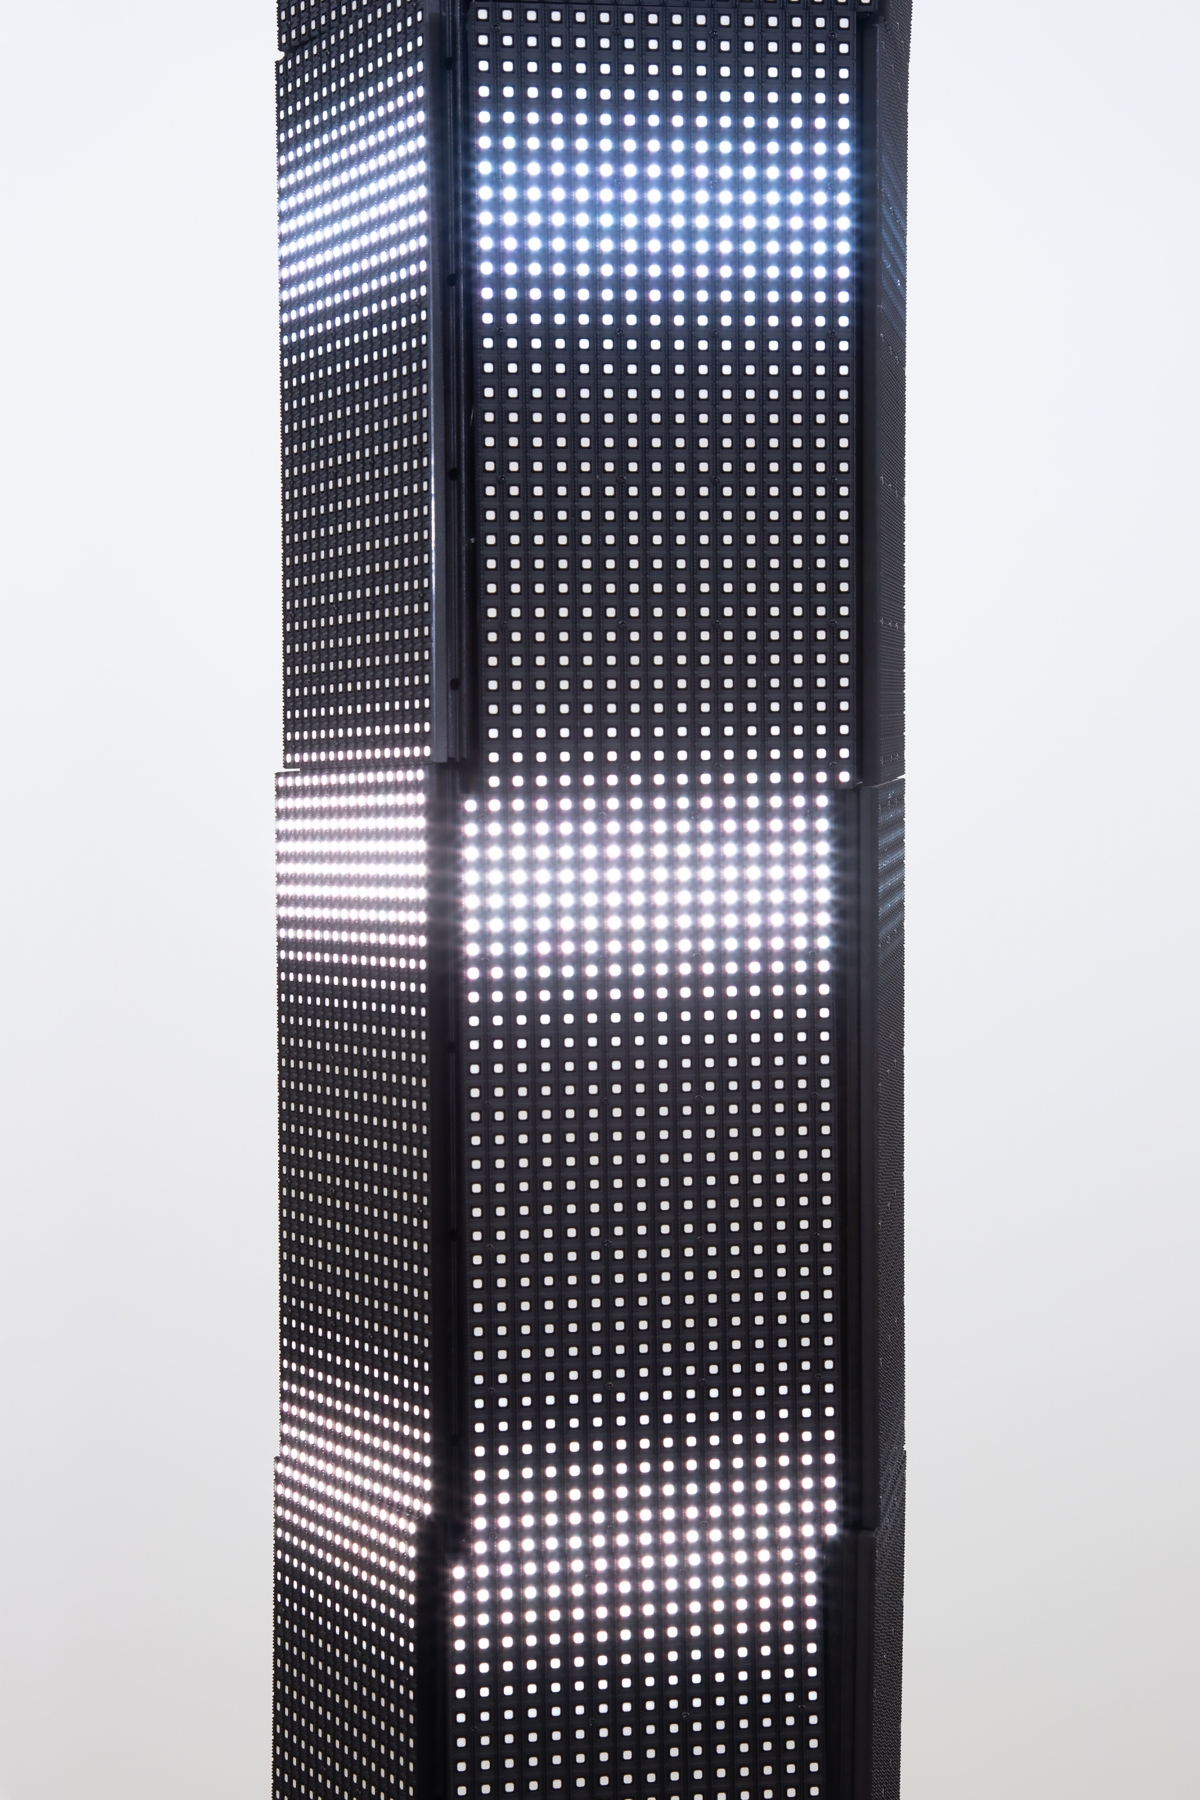 Luke Murphy, Lord Kelvin Column with 5 sides and 9 lights, detail, 2020